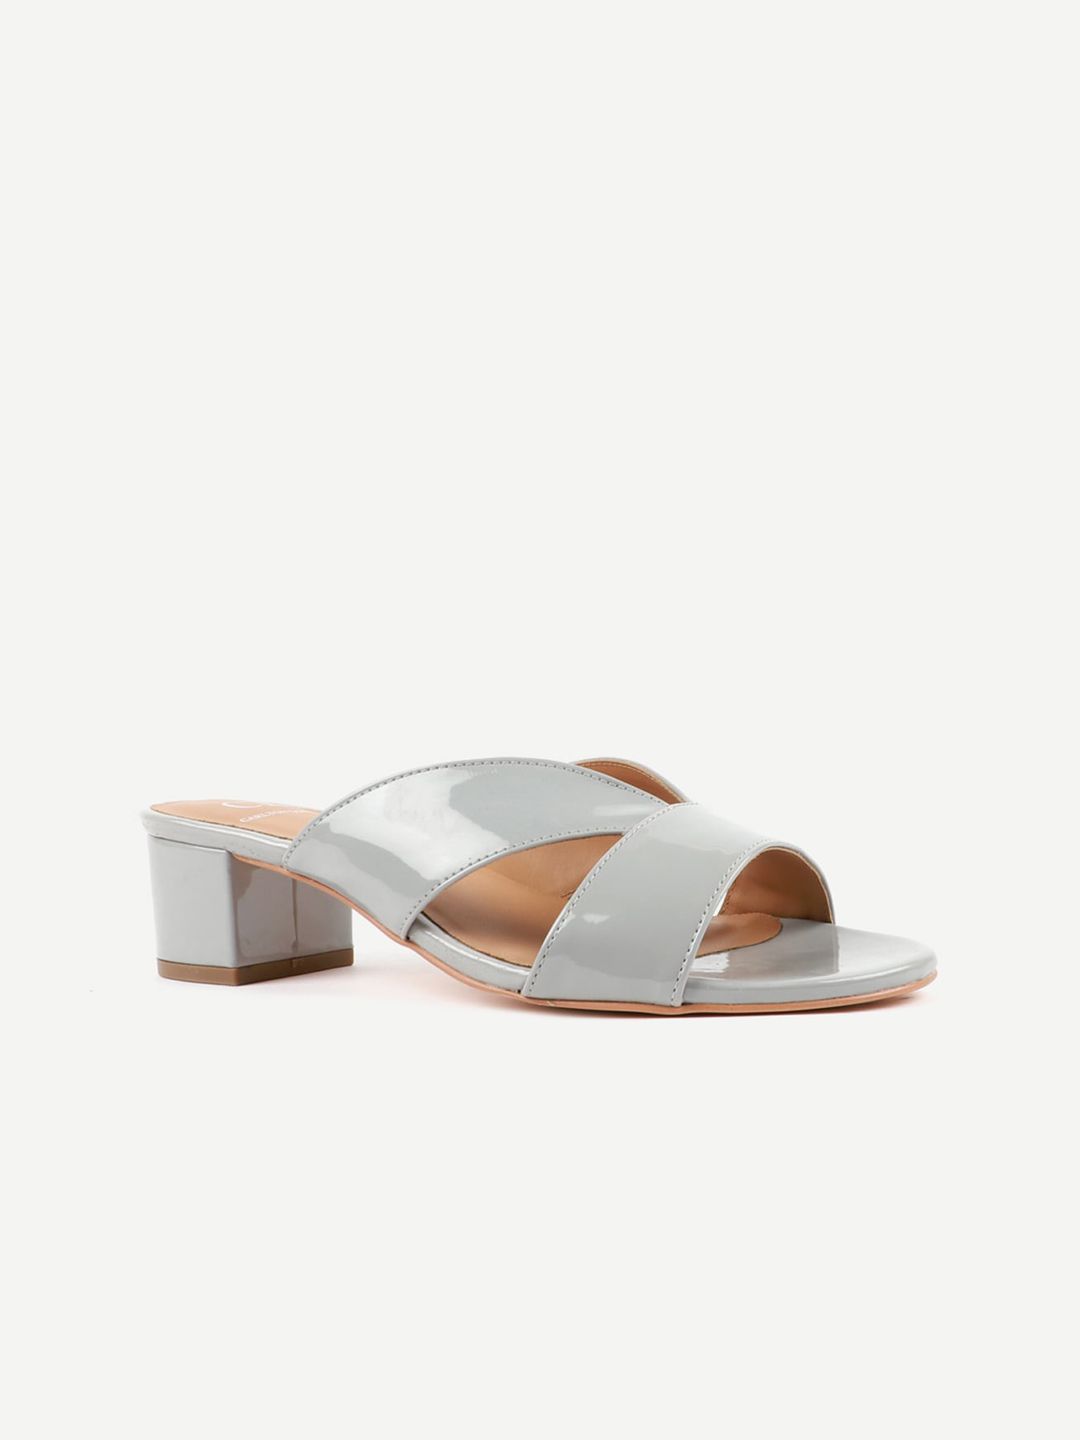 Carlton London Grey Block Sandals with Buckles Price in India